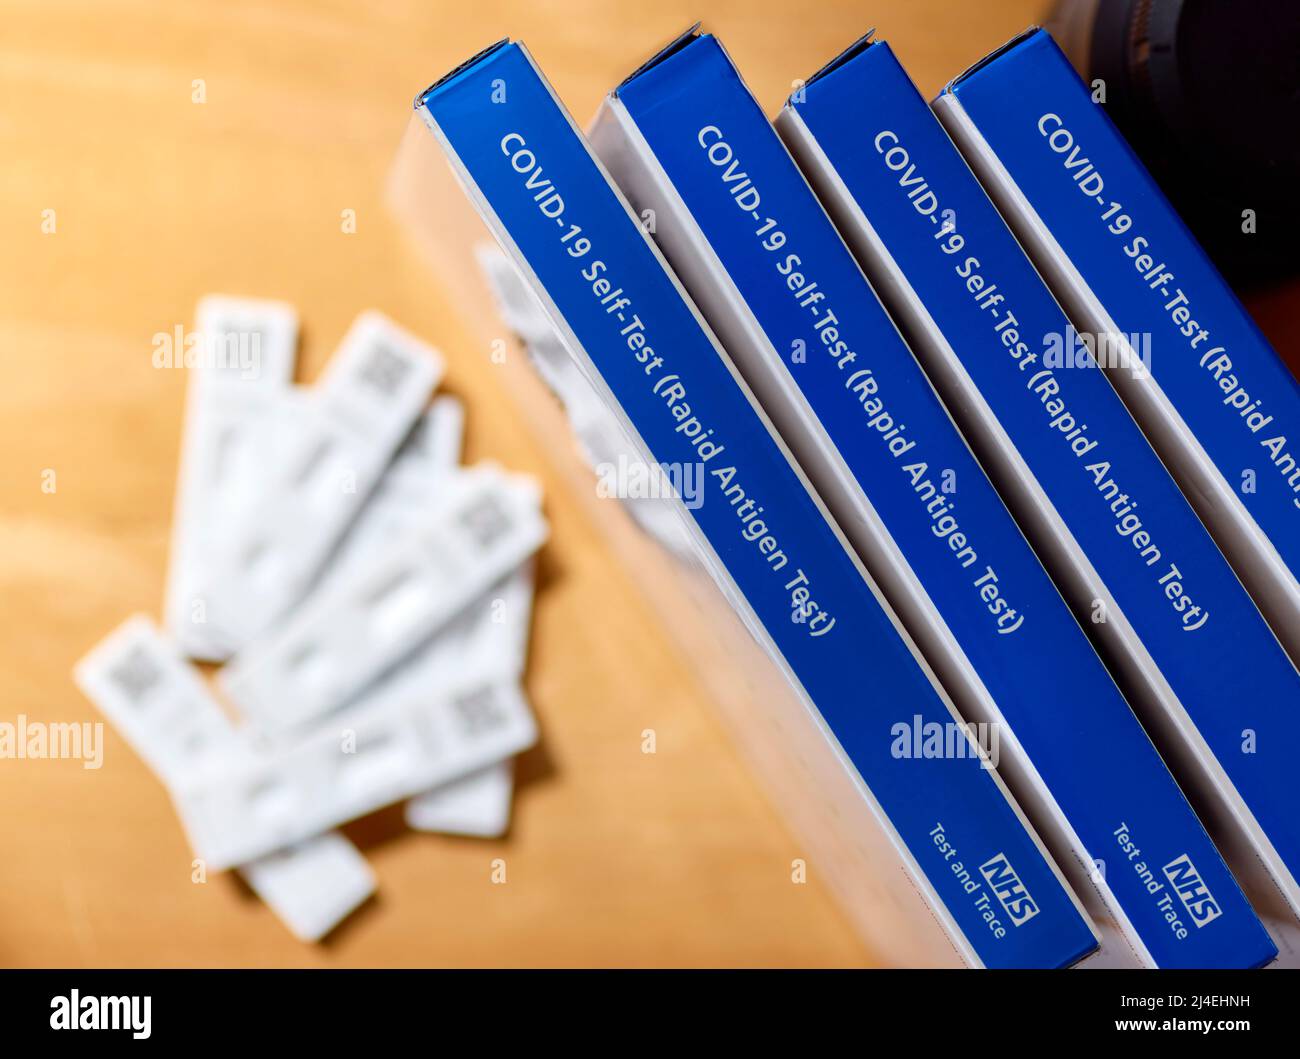 Covid lateral Flow tests kits Stock Photo